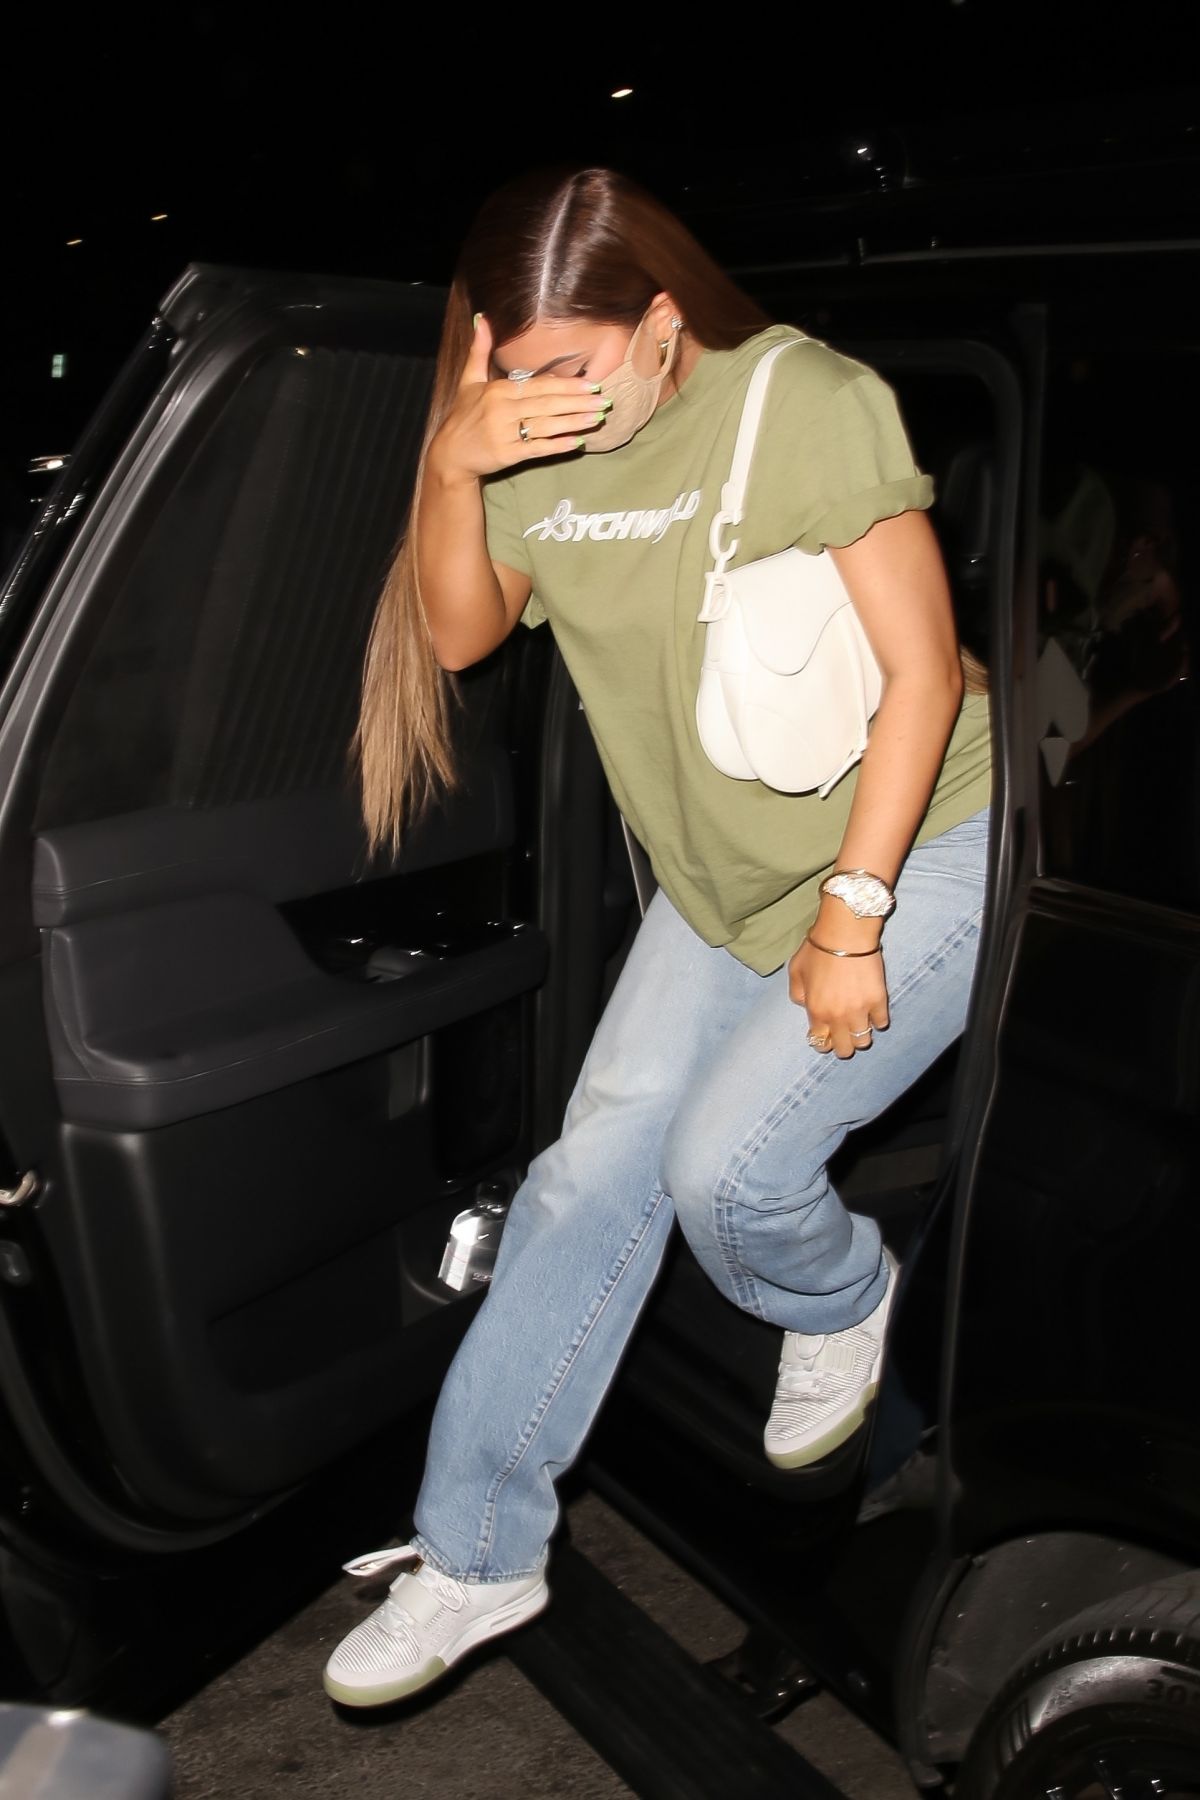 kylie-jenner-at-a-tiktok-party-with-zack-bia-at-40-love-in-west-hollywood-09-09-2020-11.jpg